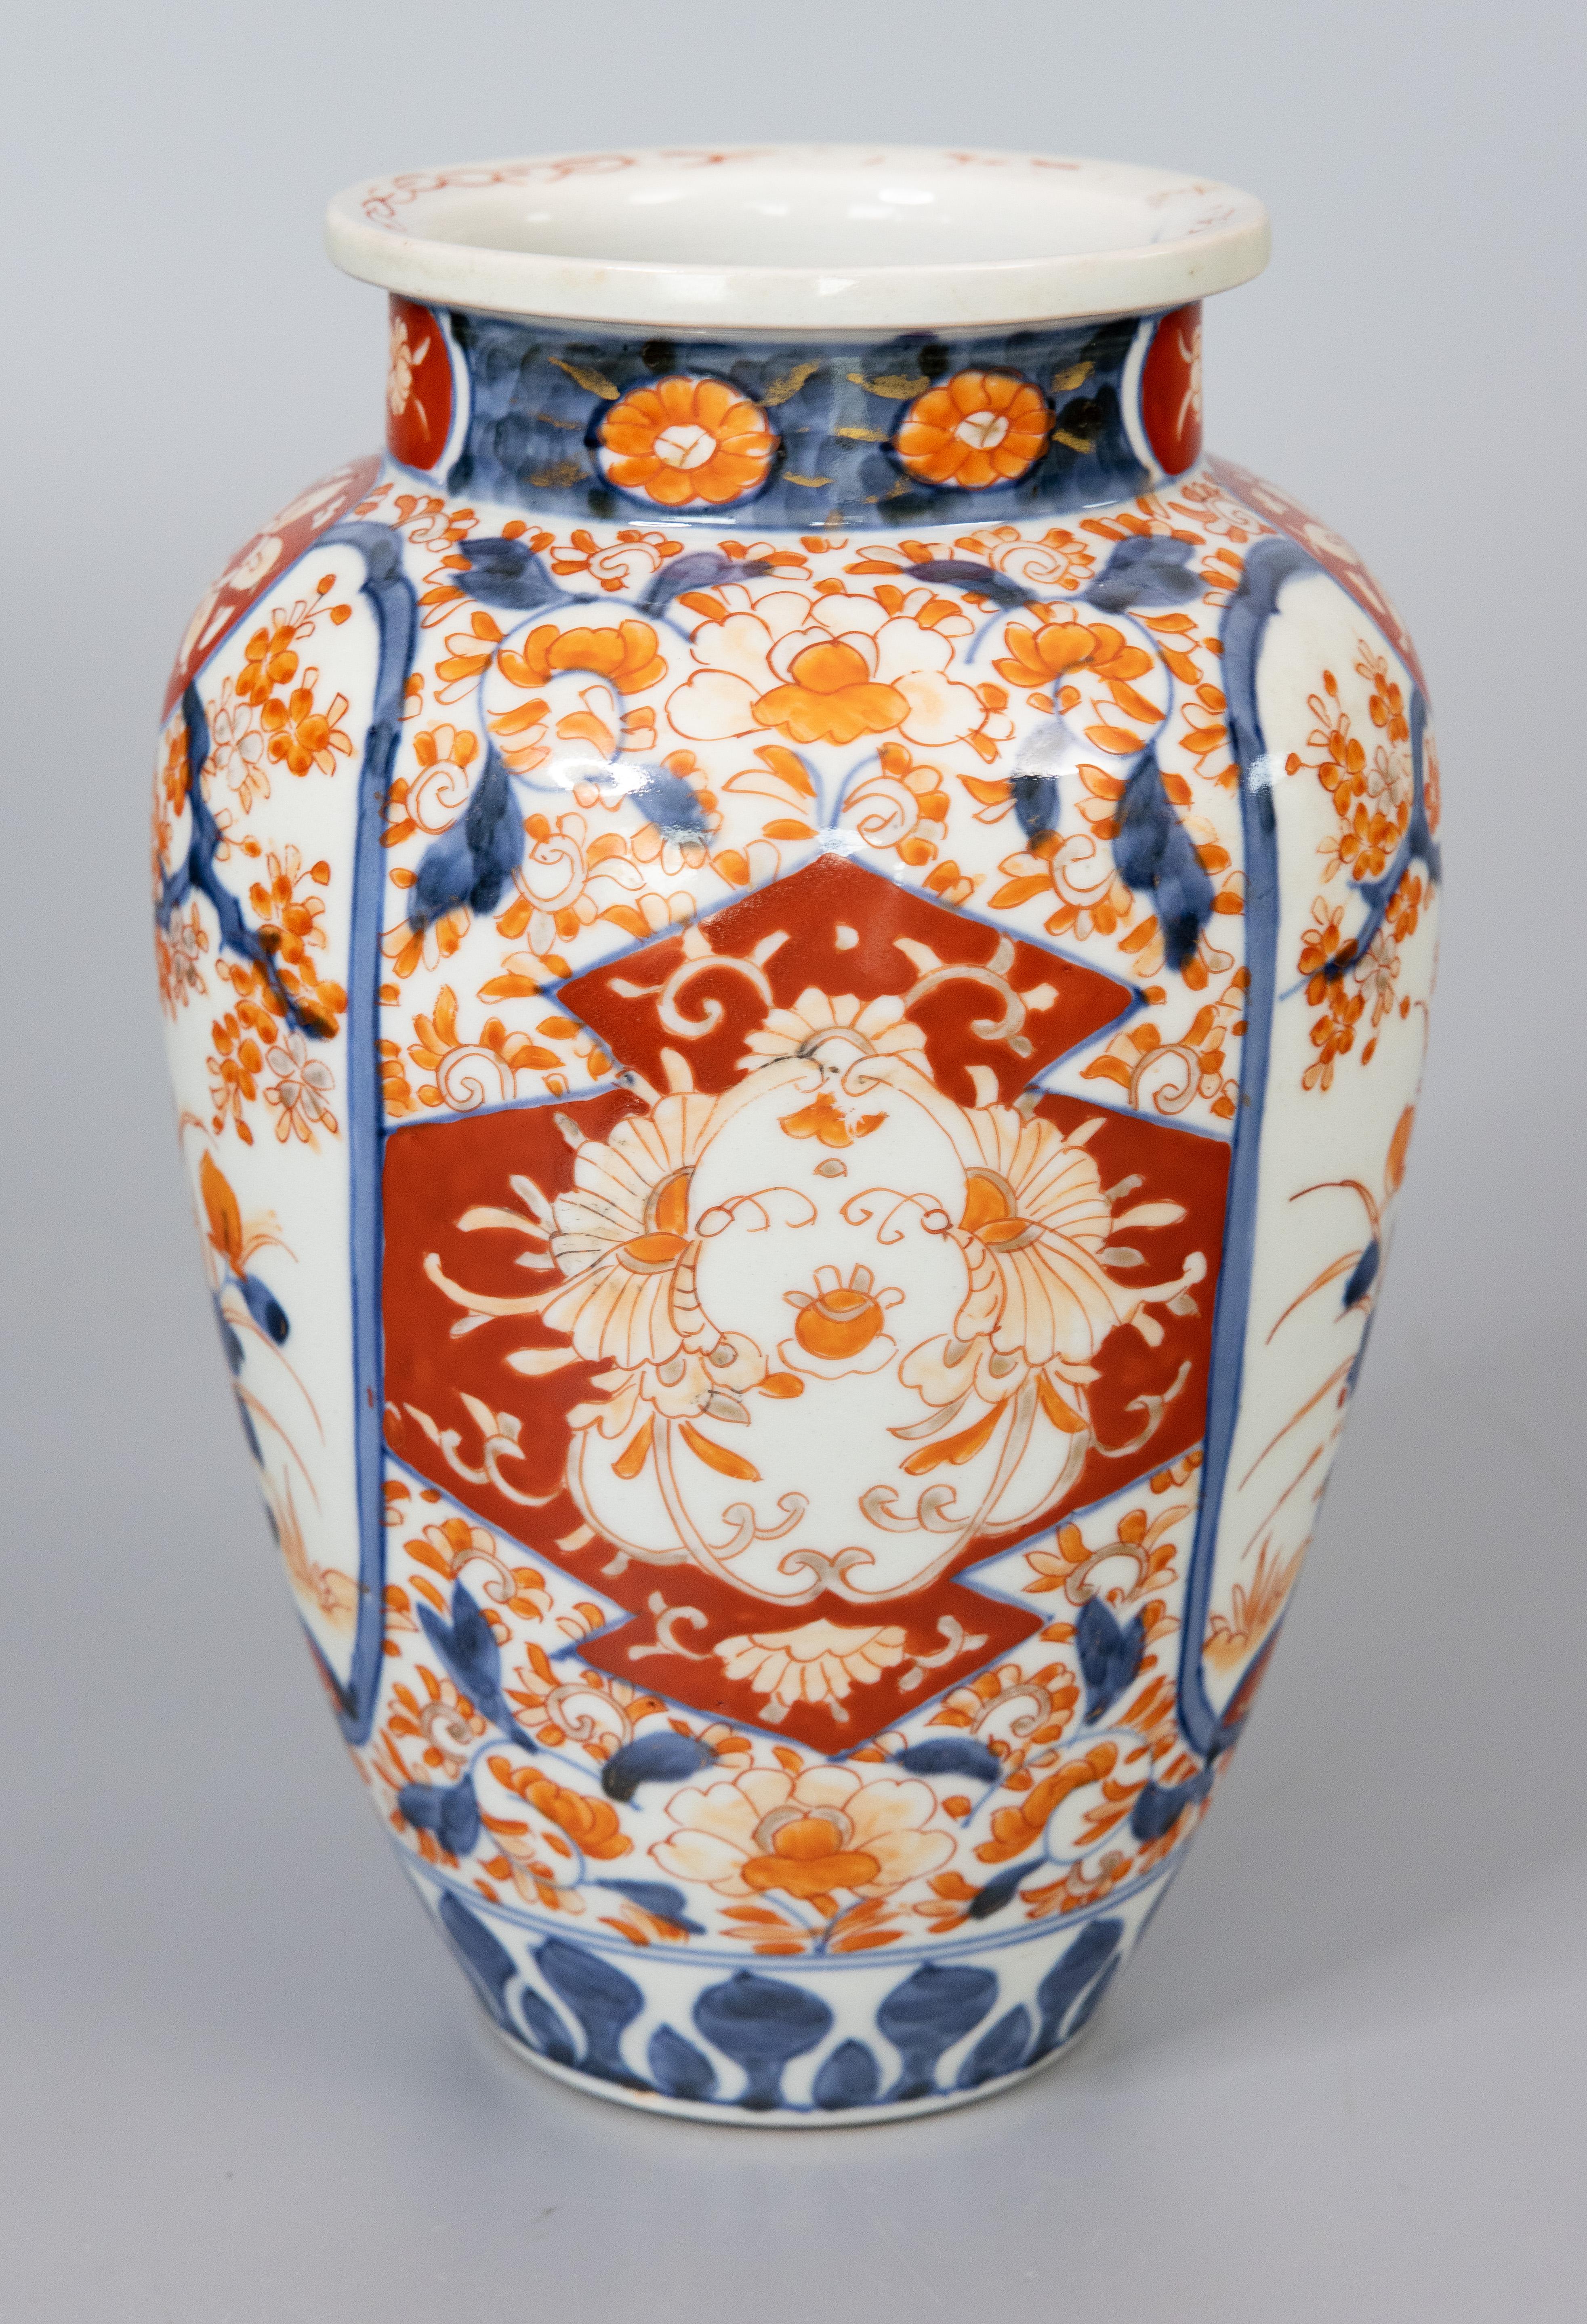 Antique 19th Century Japanese Imari Porcelain Vase In Good Condition For Sale In Pearland, TX